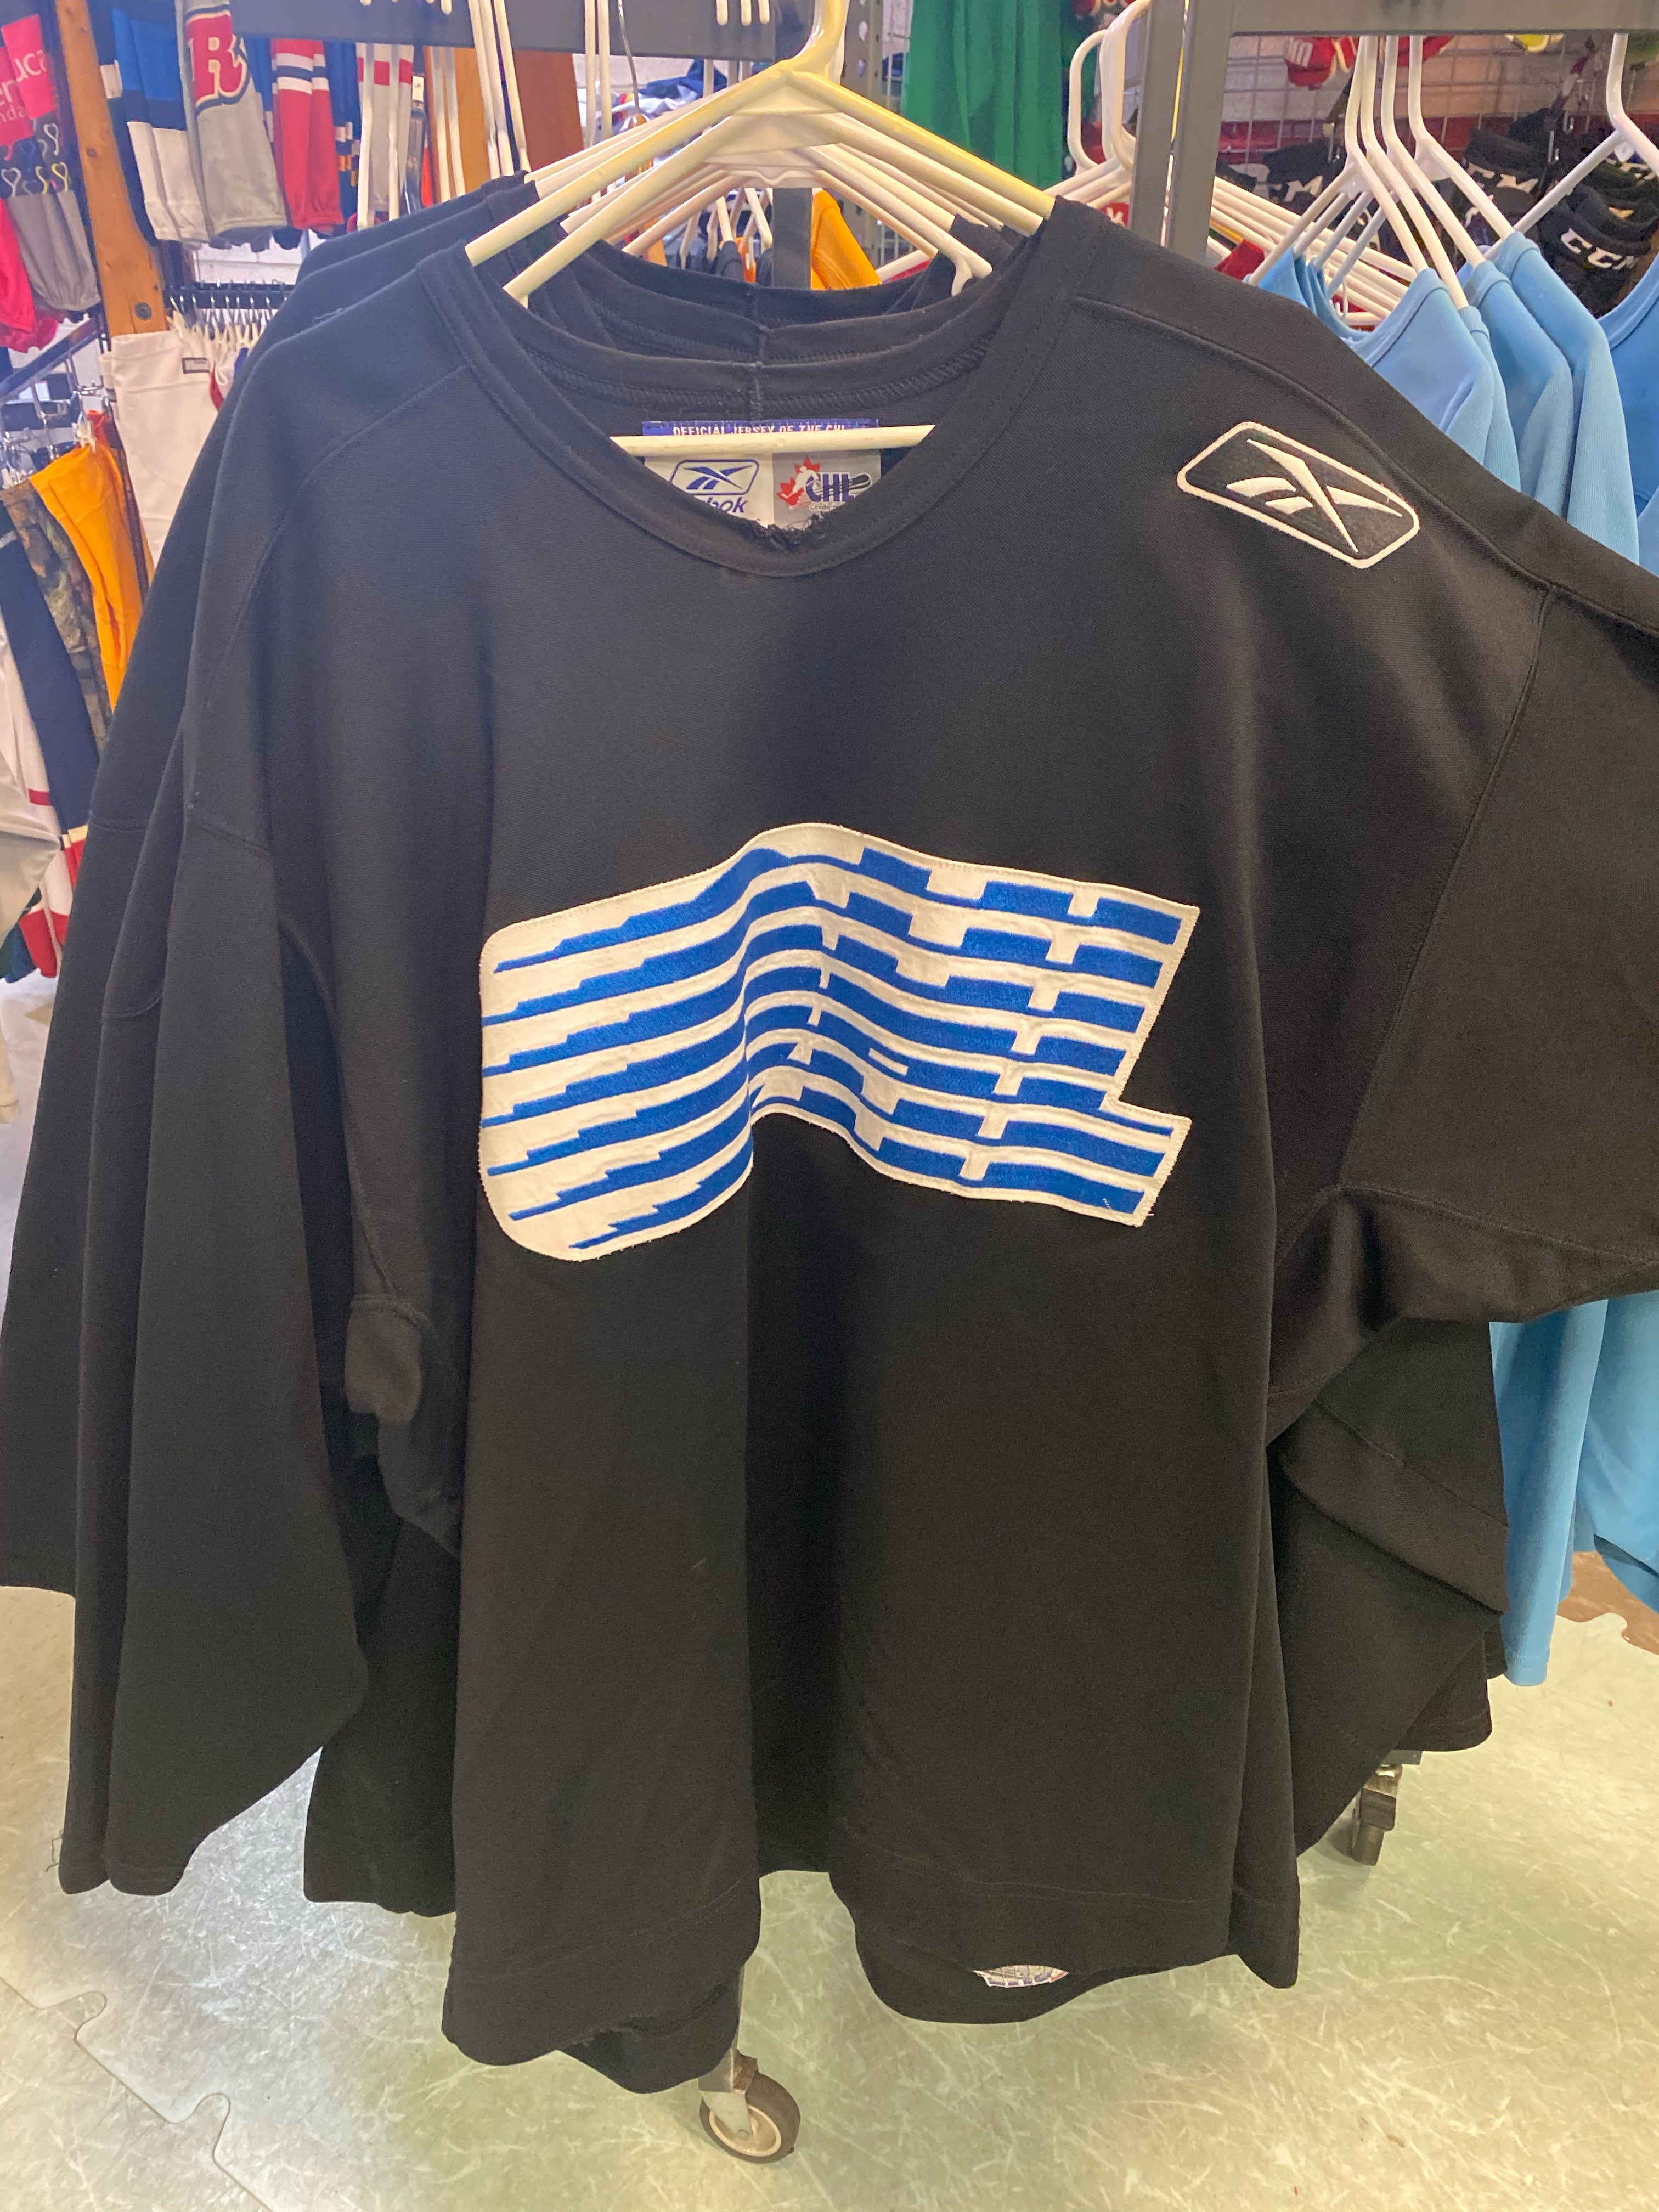 ohl practice jersey products for sale